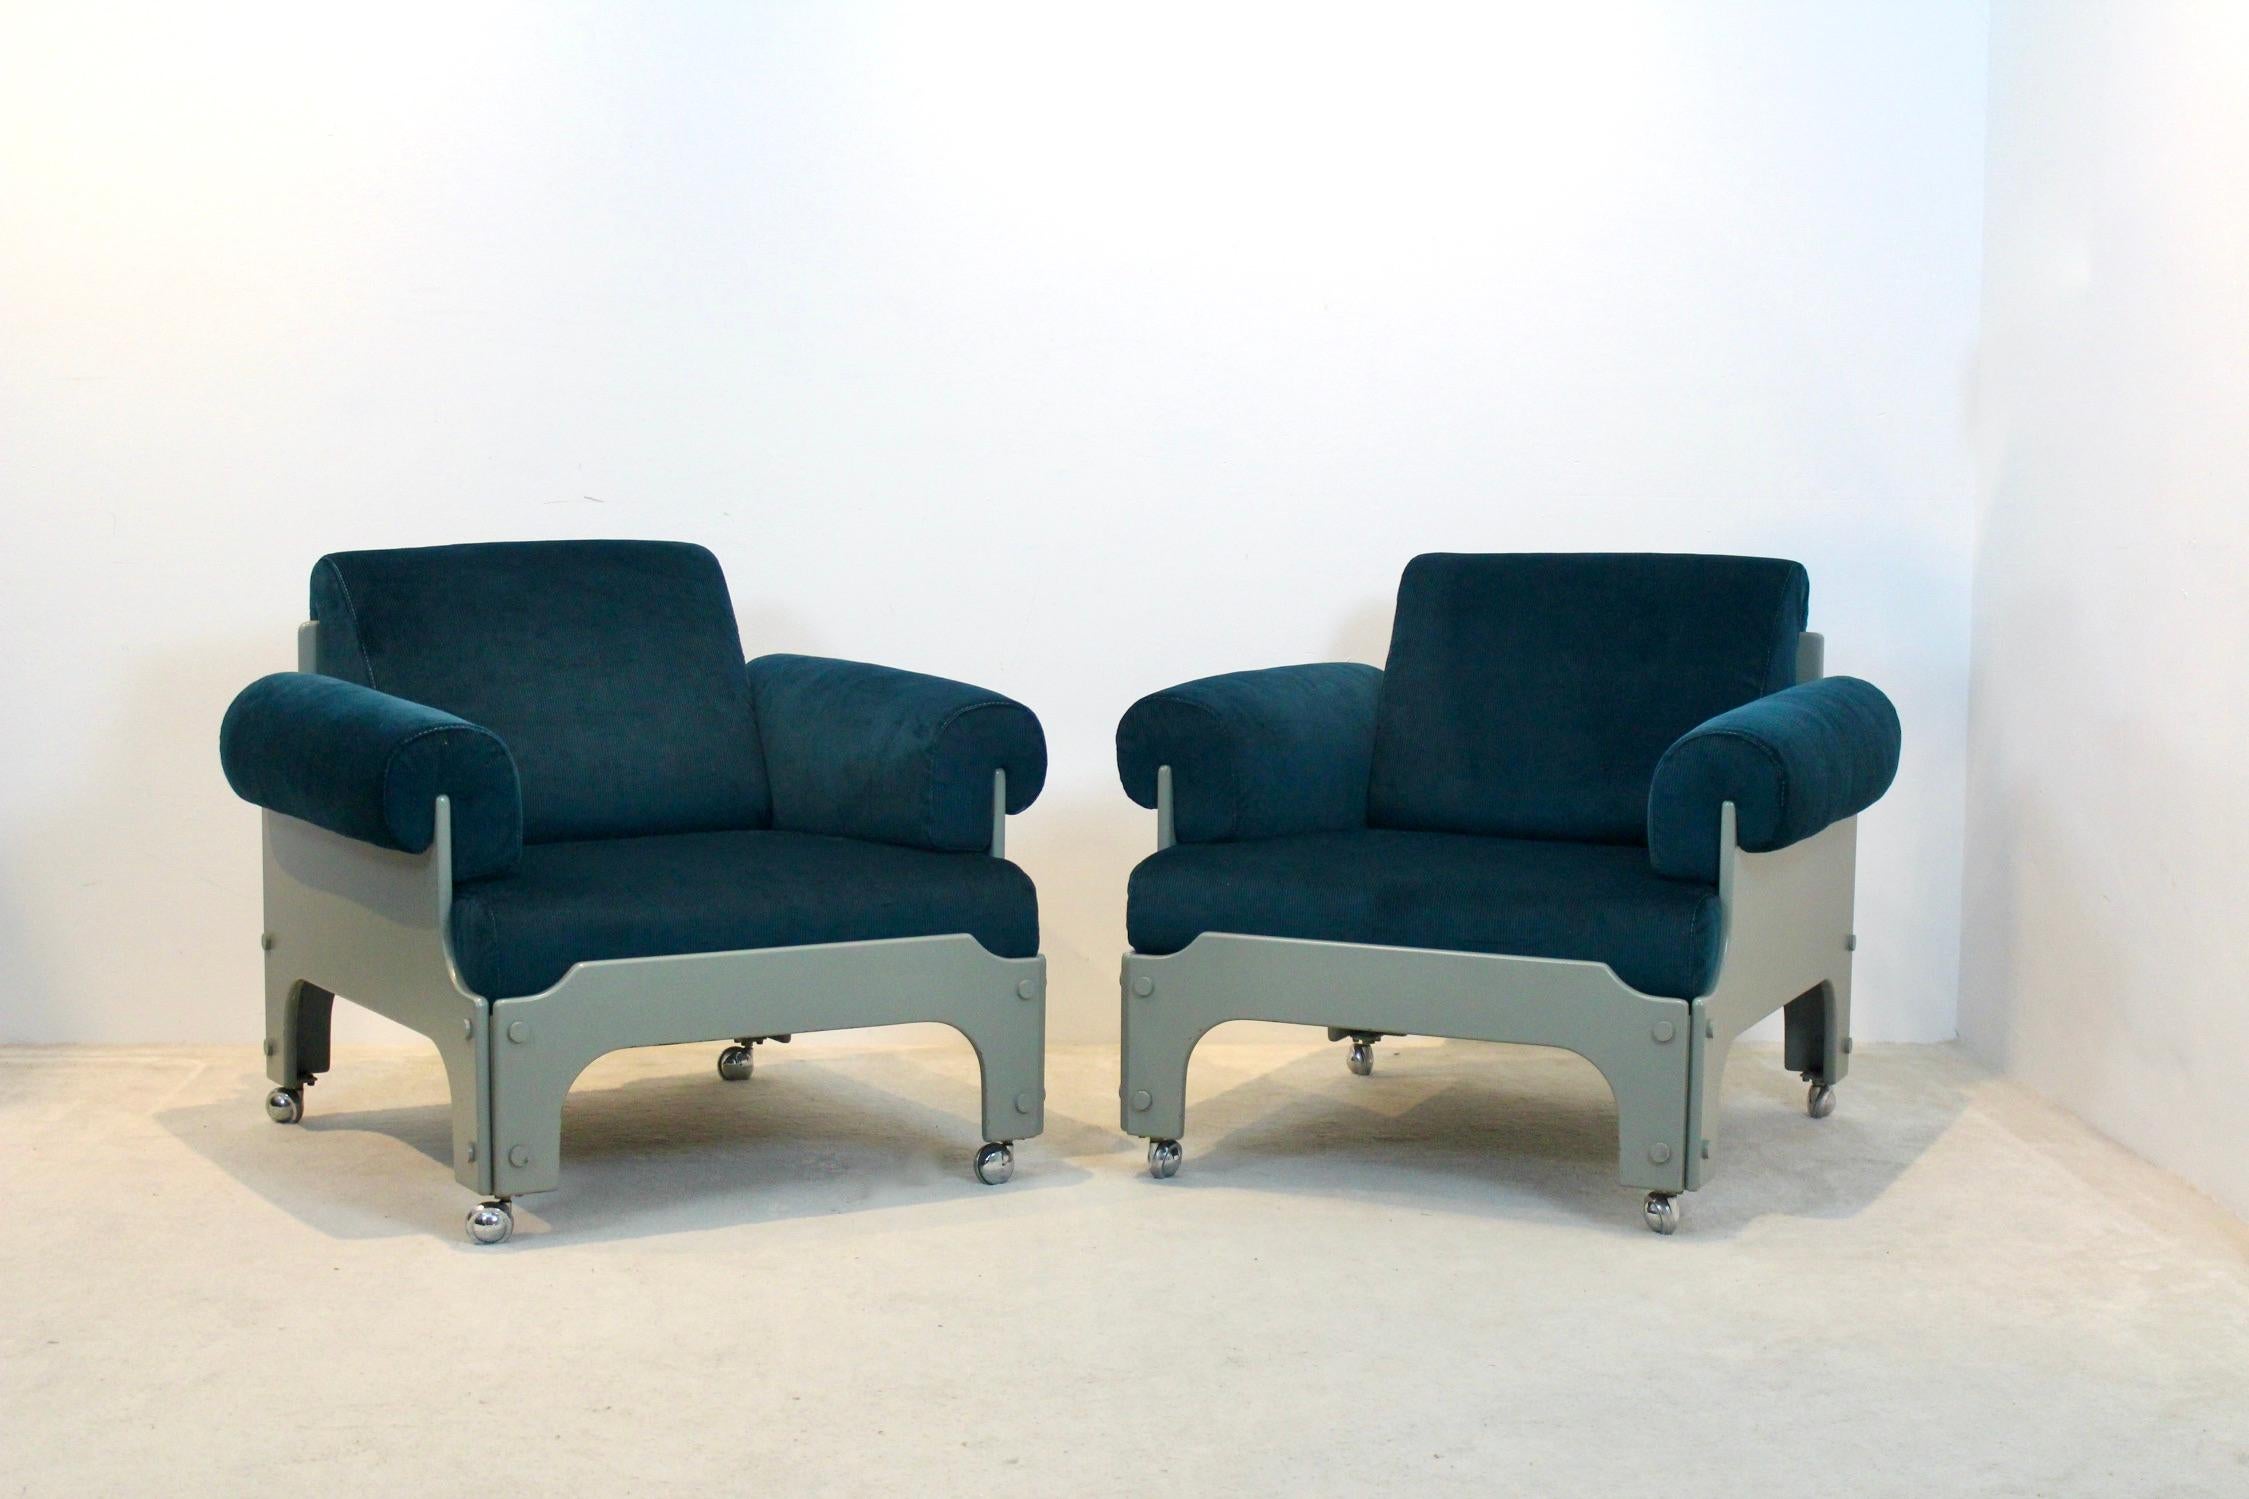 Very Rare SZ 85 Spectrum Easy Chairs by Jan Pieter Berghoef, 1968 For Sale 5